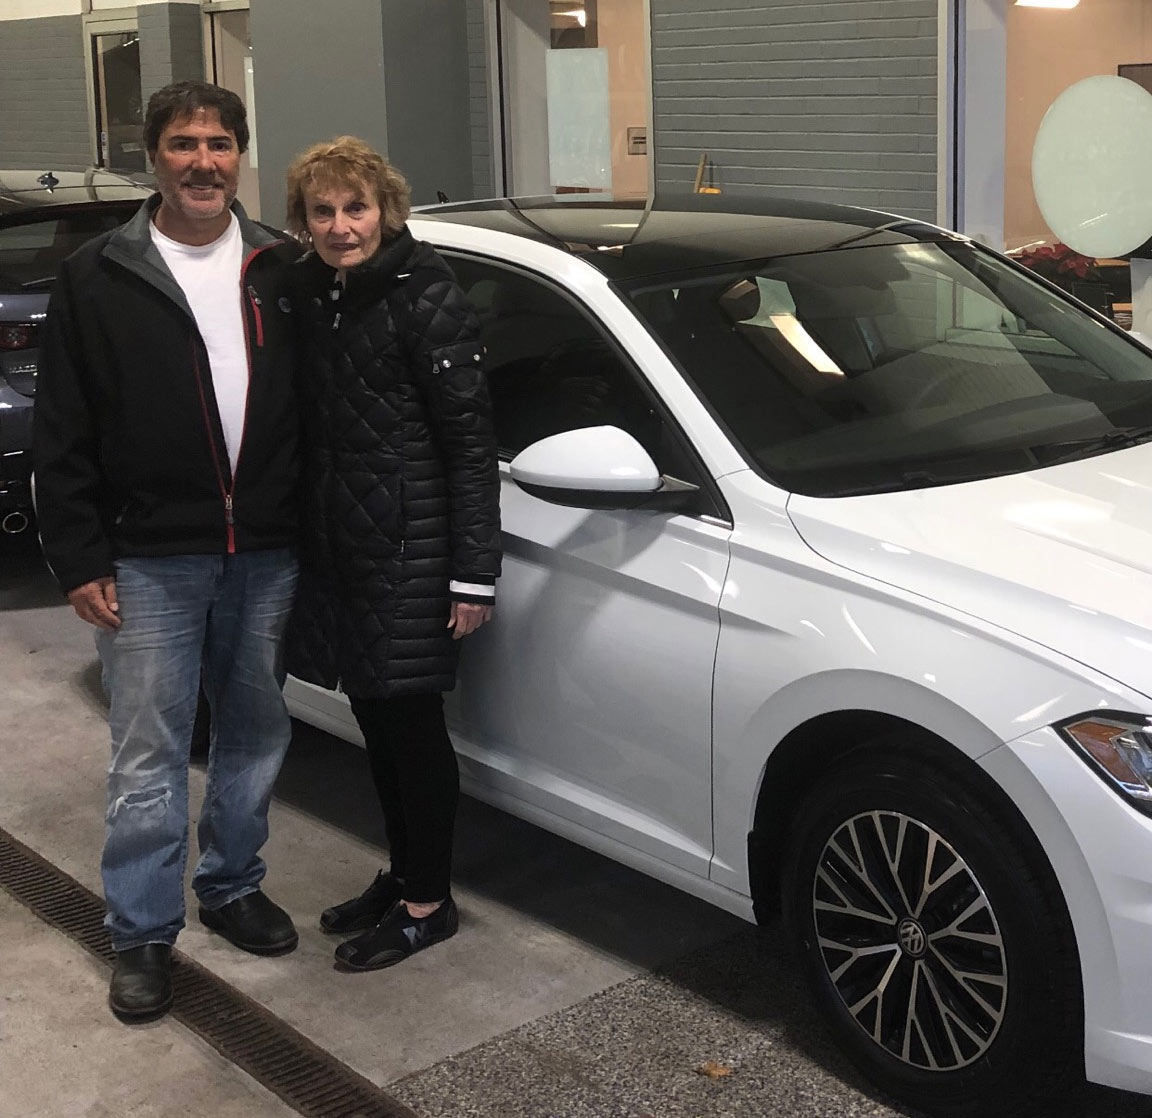 Michael standing with Harriet from University Heights and her new luxury vehicle.